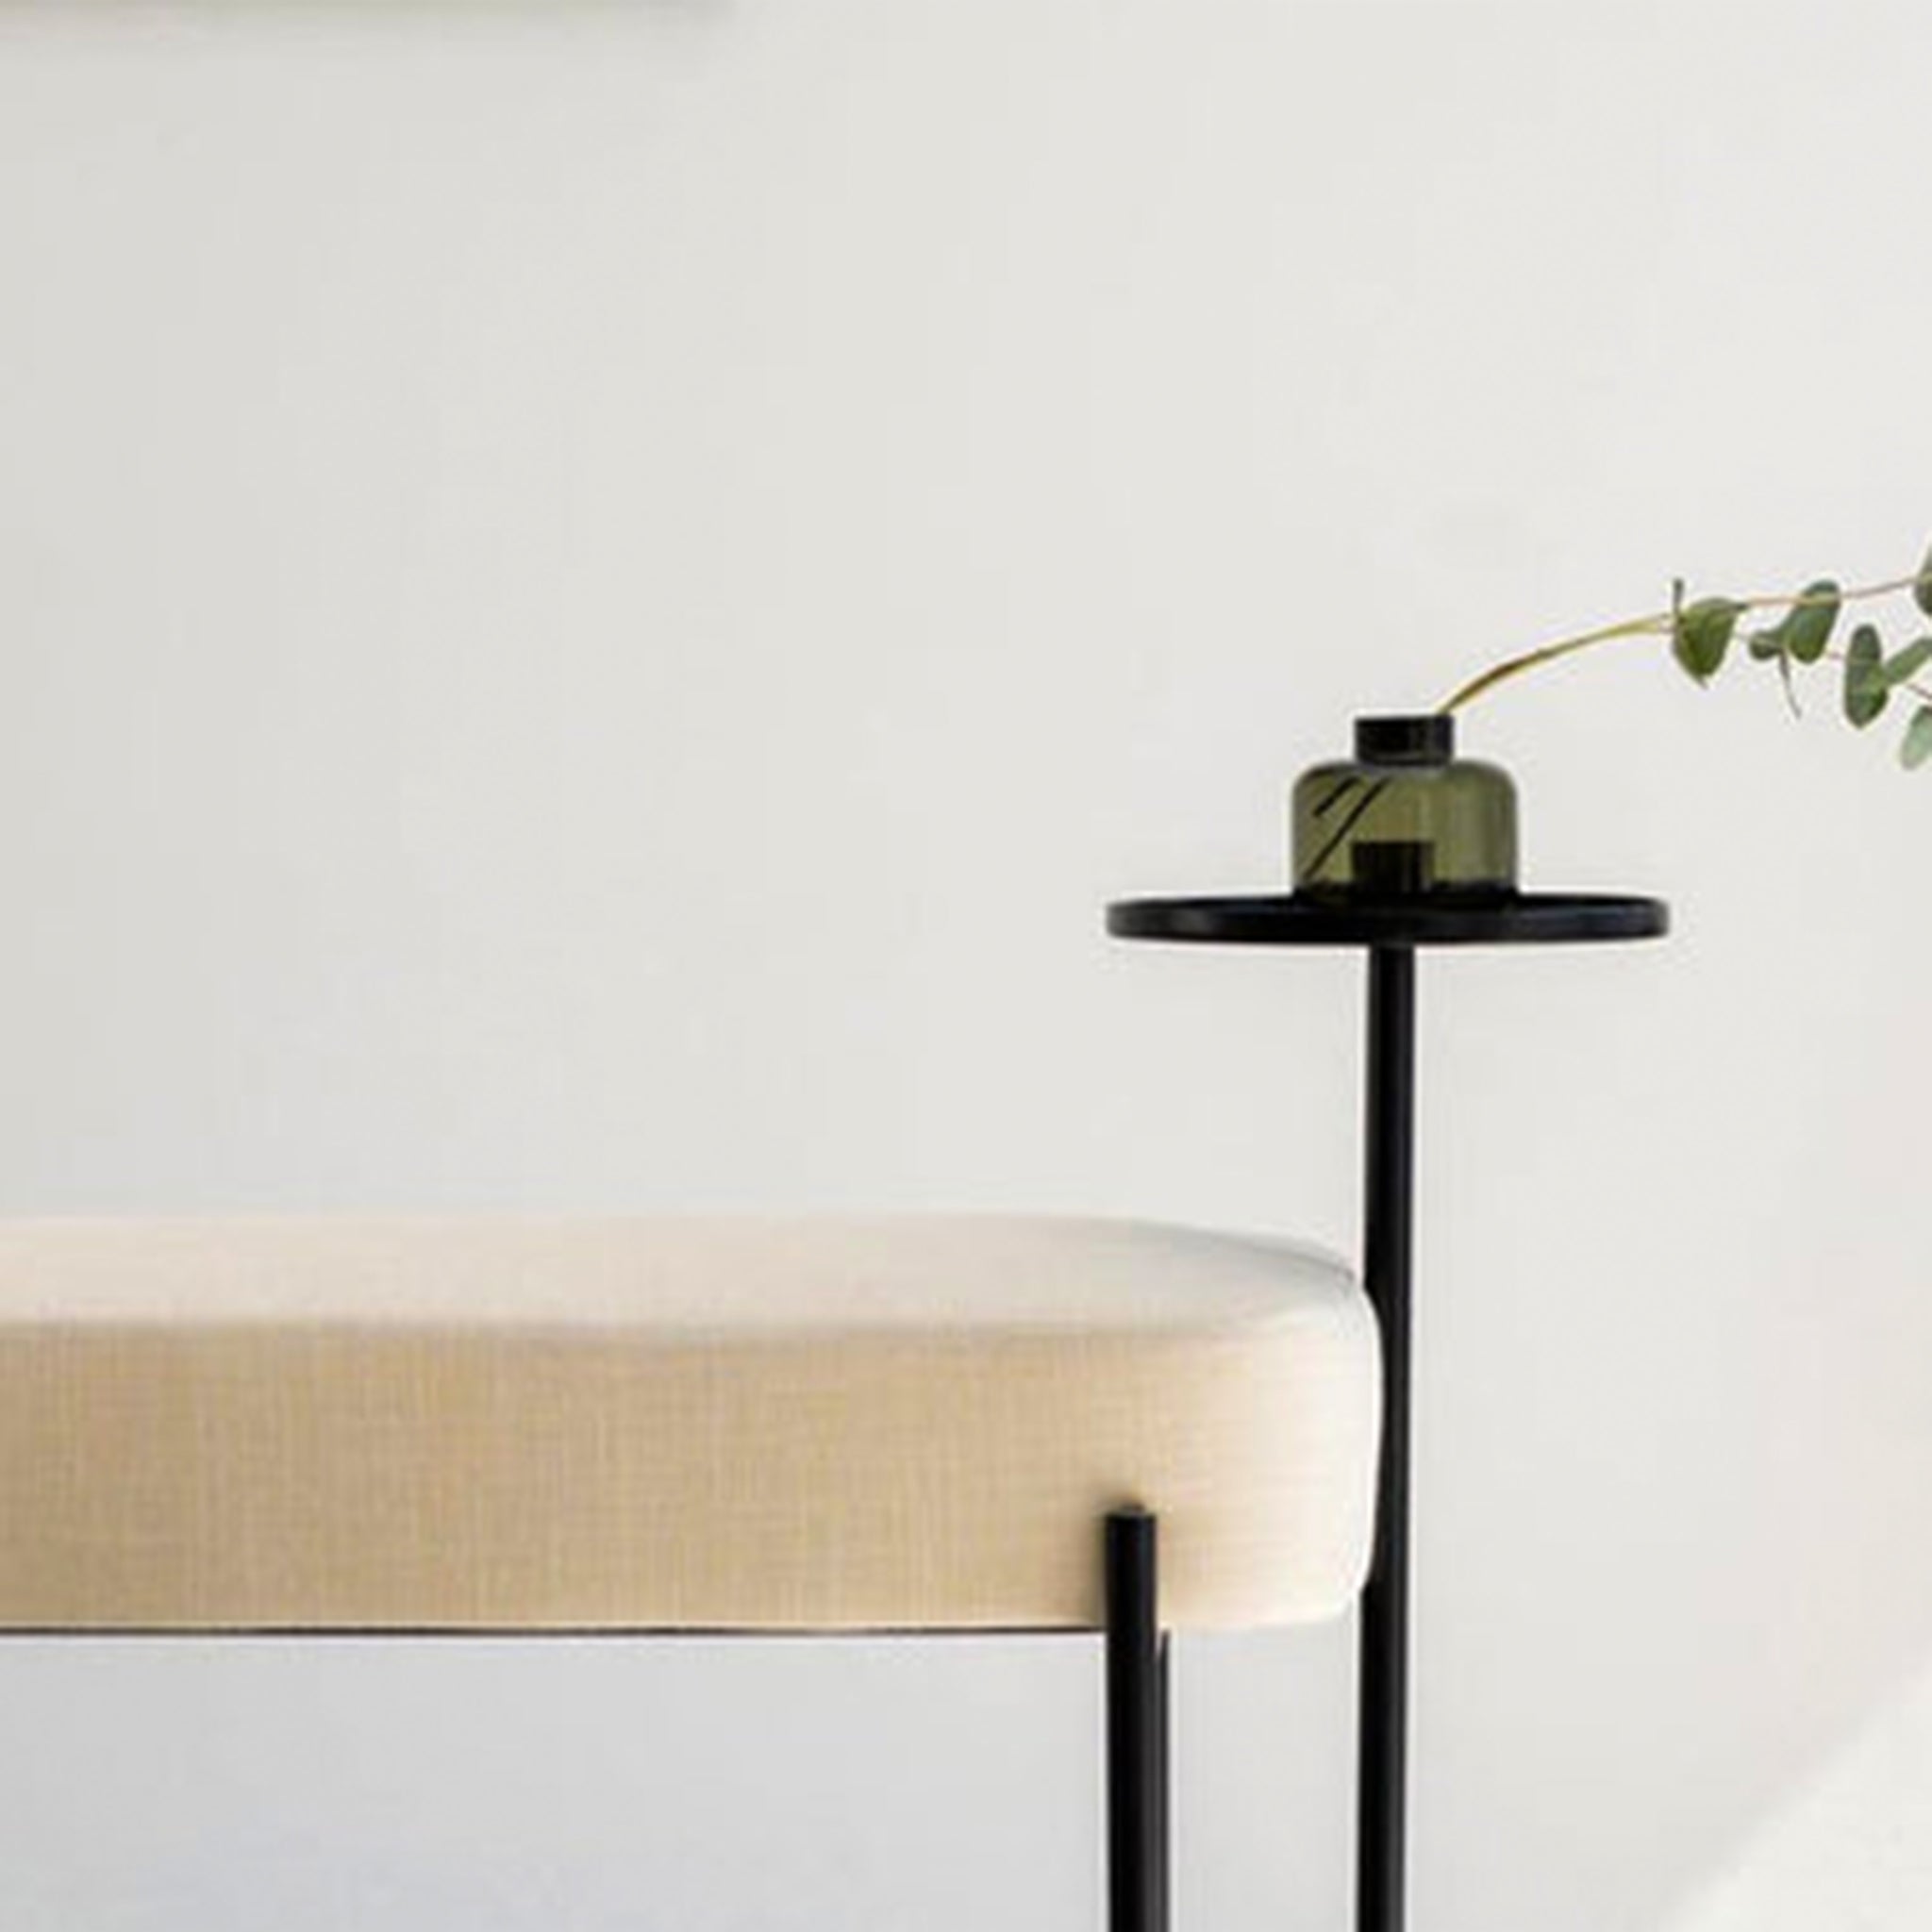 Close-up of a modern bench with a beige upholstered seat and a matte black powder-coated steel frame, featuring an attached flat side table with a green glass vase and eucalyptus branch